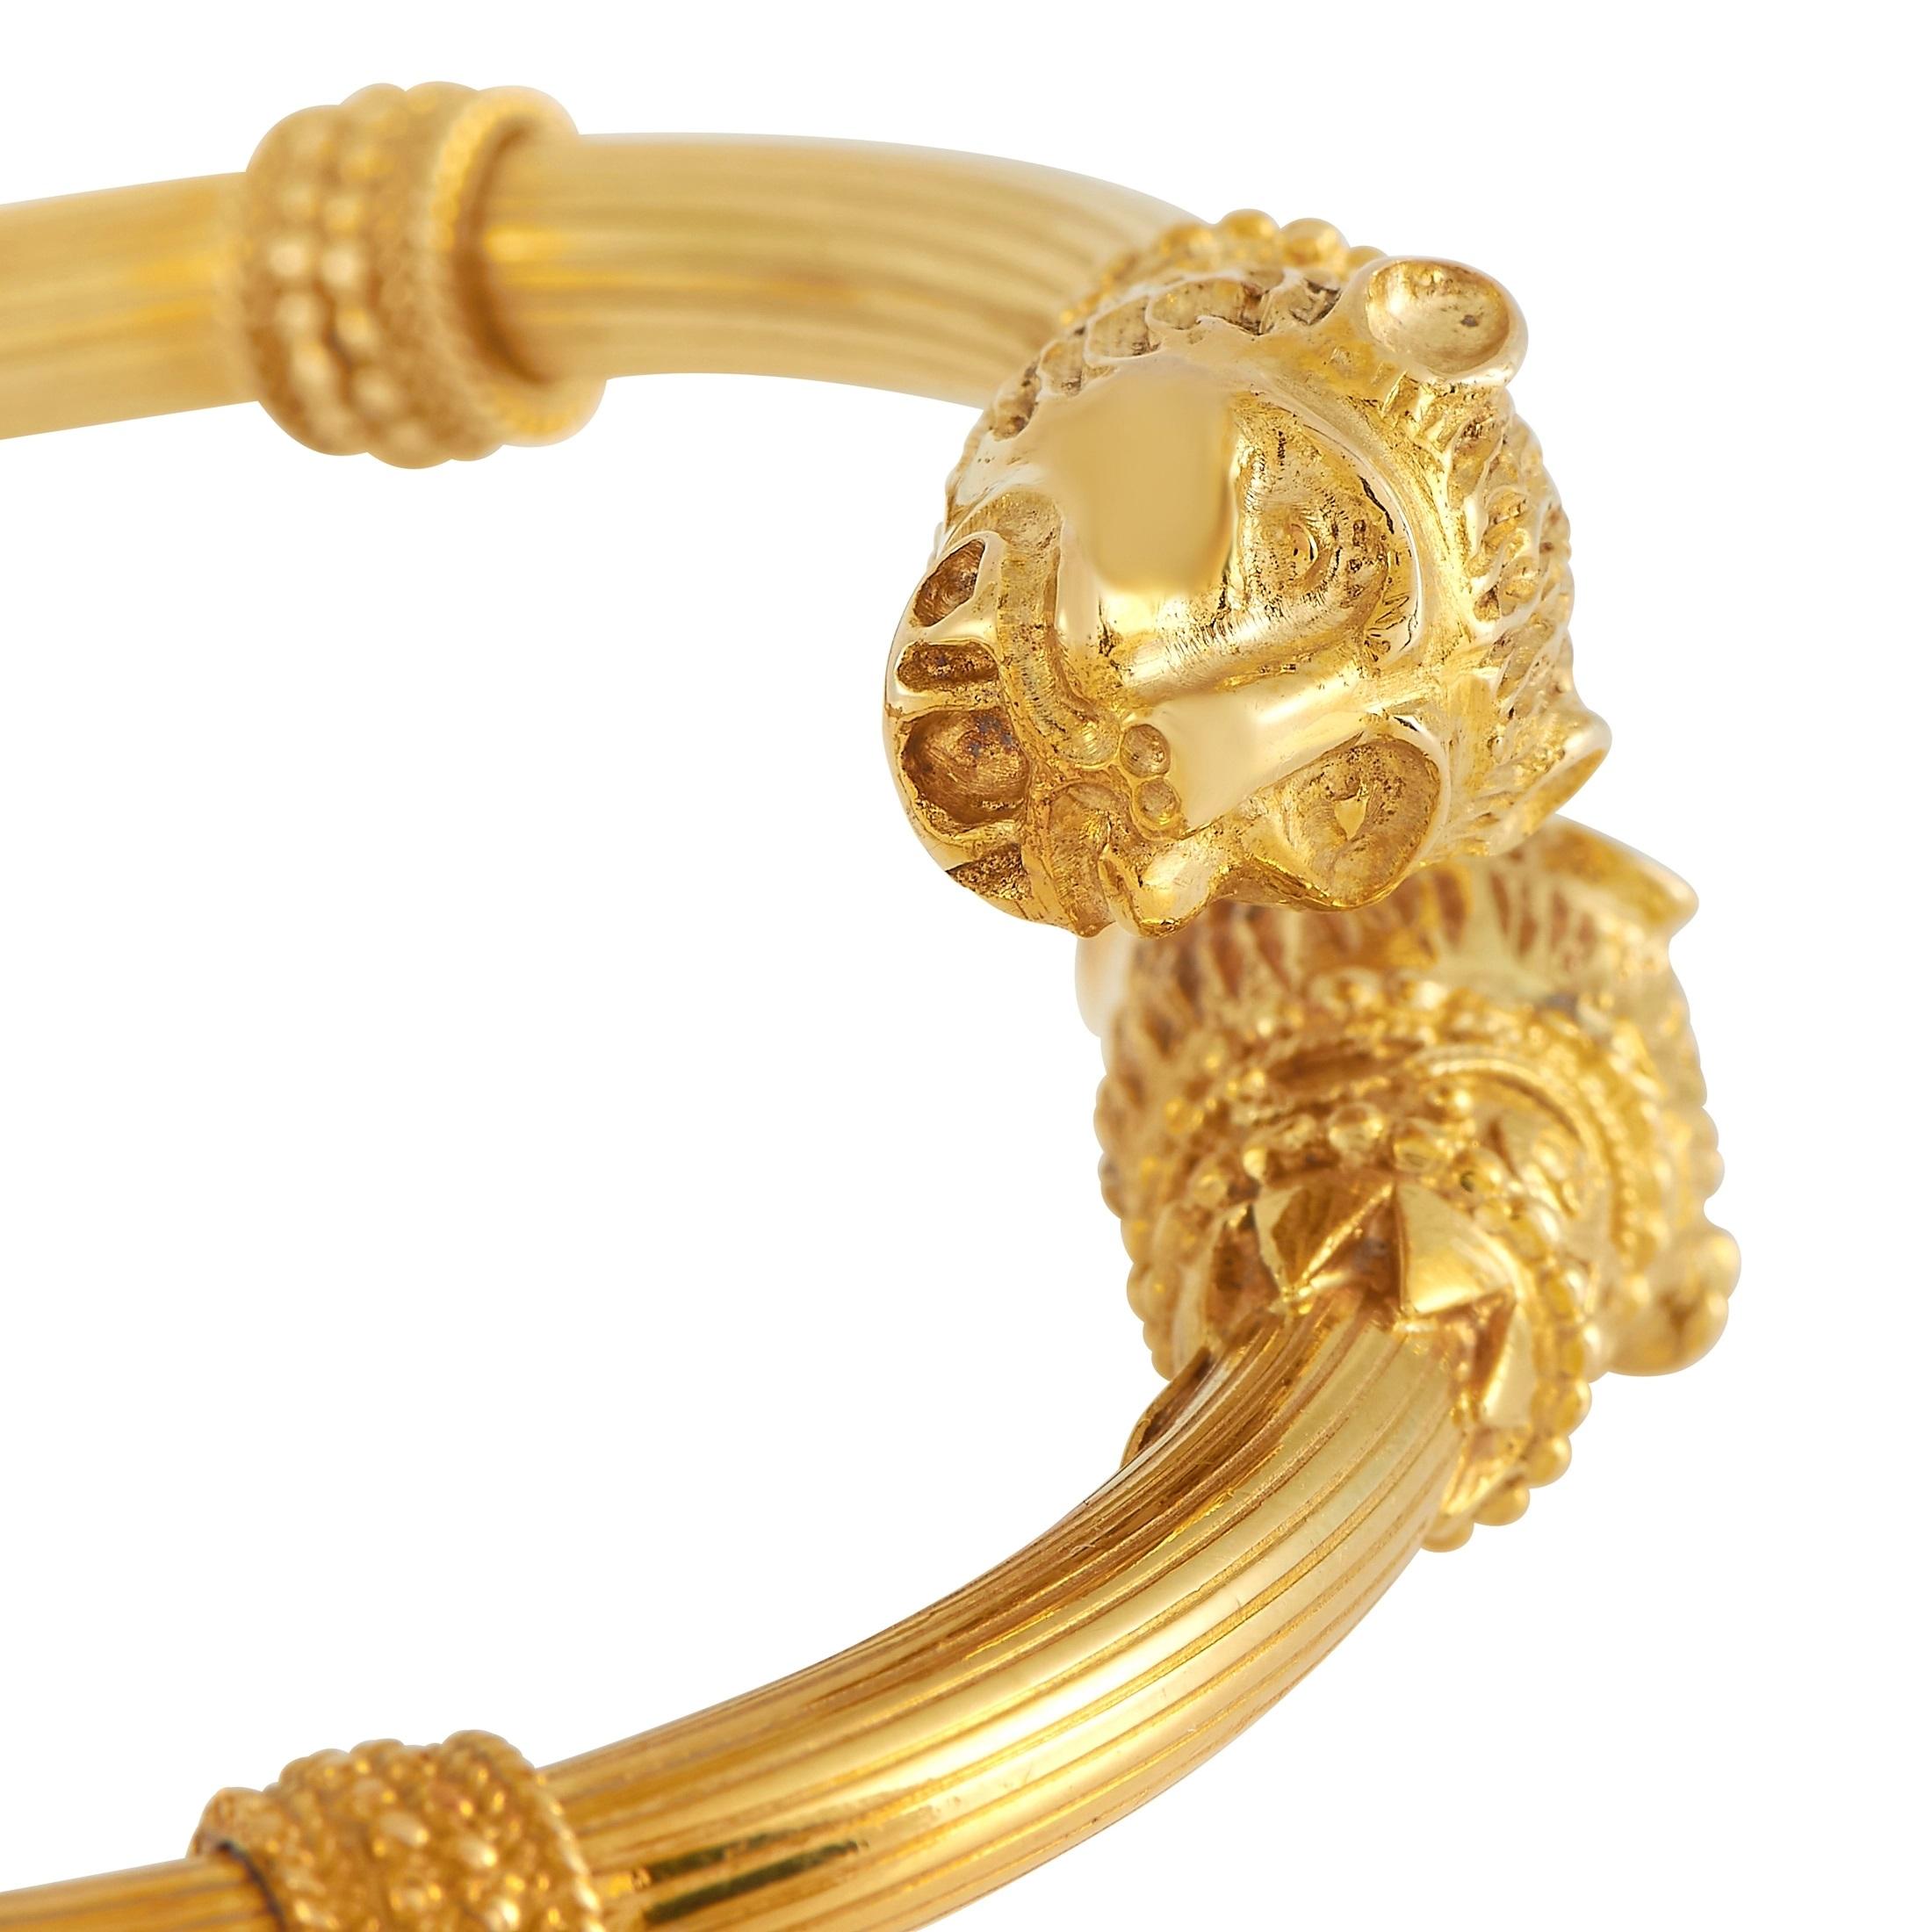 Regal and incredibly opulent, this stunning Zolotas bracelet will add elegance to any ensemble. The bold design comes to life thanks to opulent 18K Yellow Gold, panther head accents, and a design that appears to delicately wind around the wrist. It